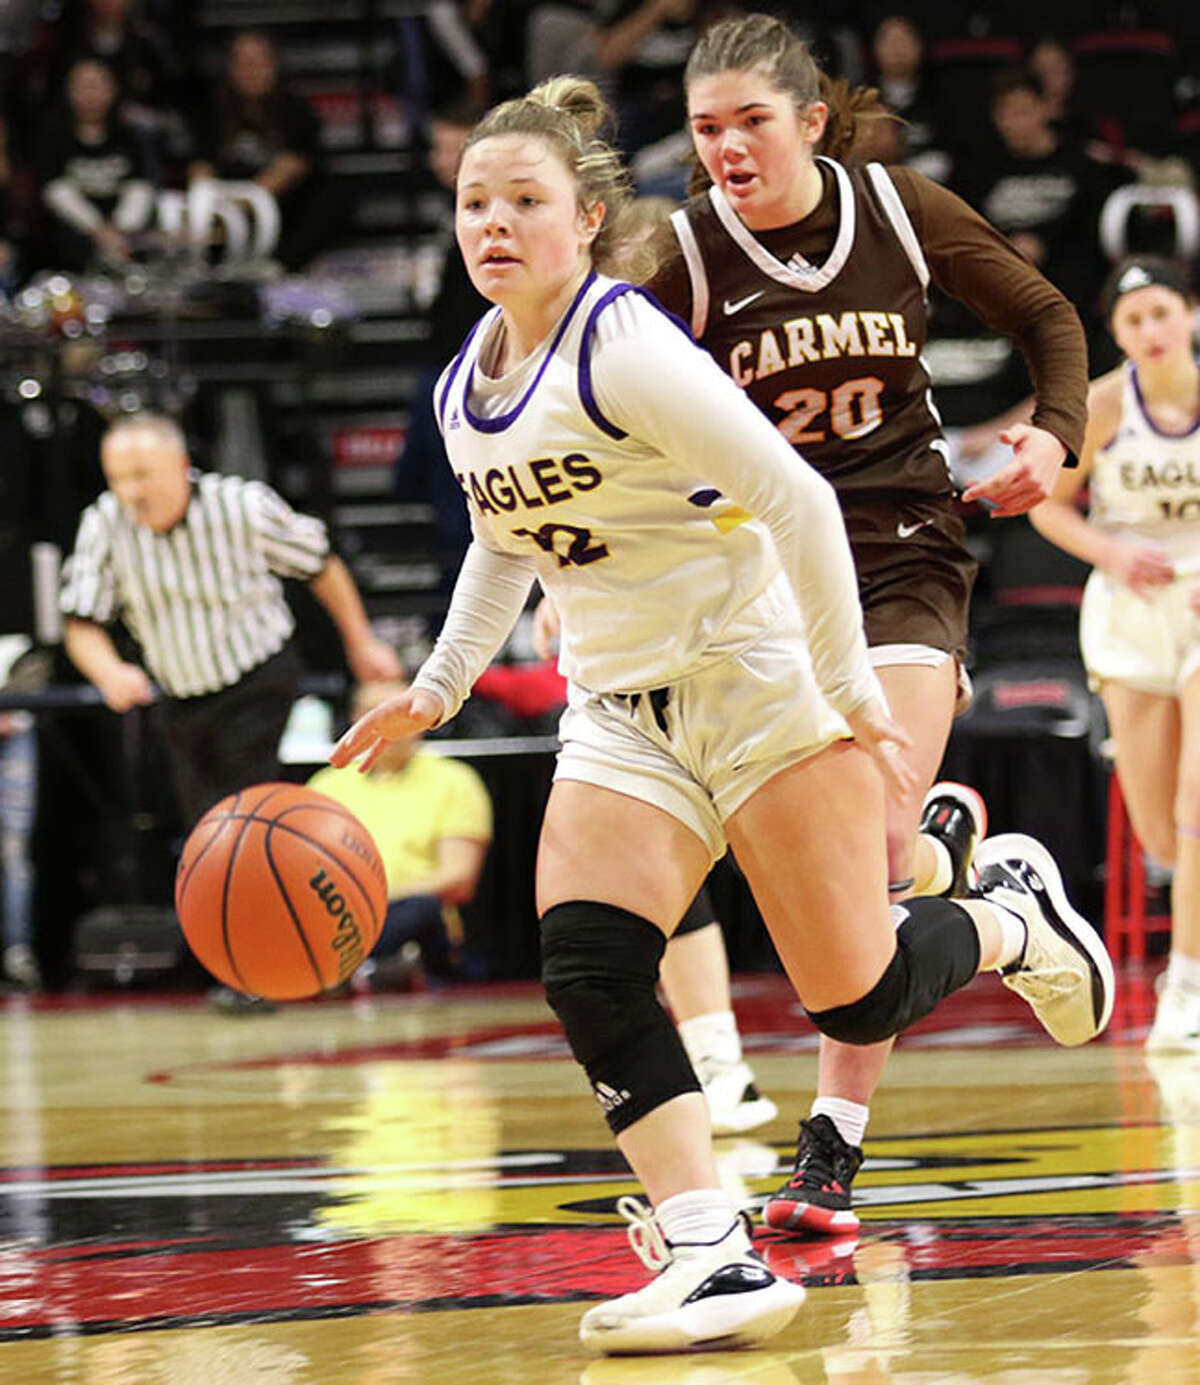 CM junior point guard Aubree Wallace heads upcourt ahead of Mundelein Carmel's Mia Gillis (20) in a Class 3A state tournament semifinal March 4 at Redbird Arena in Normal.